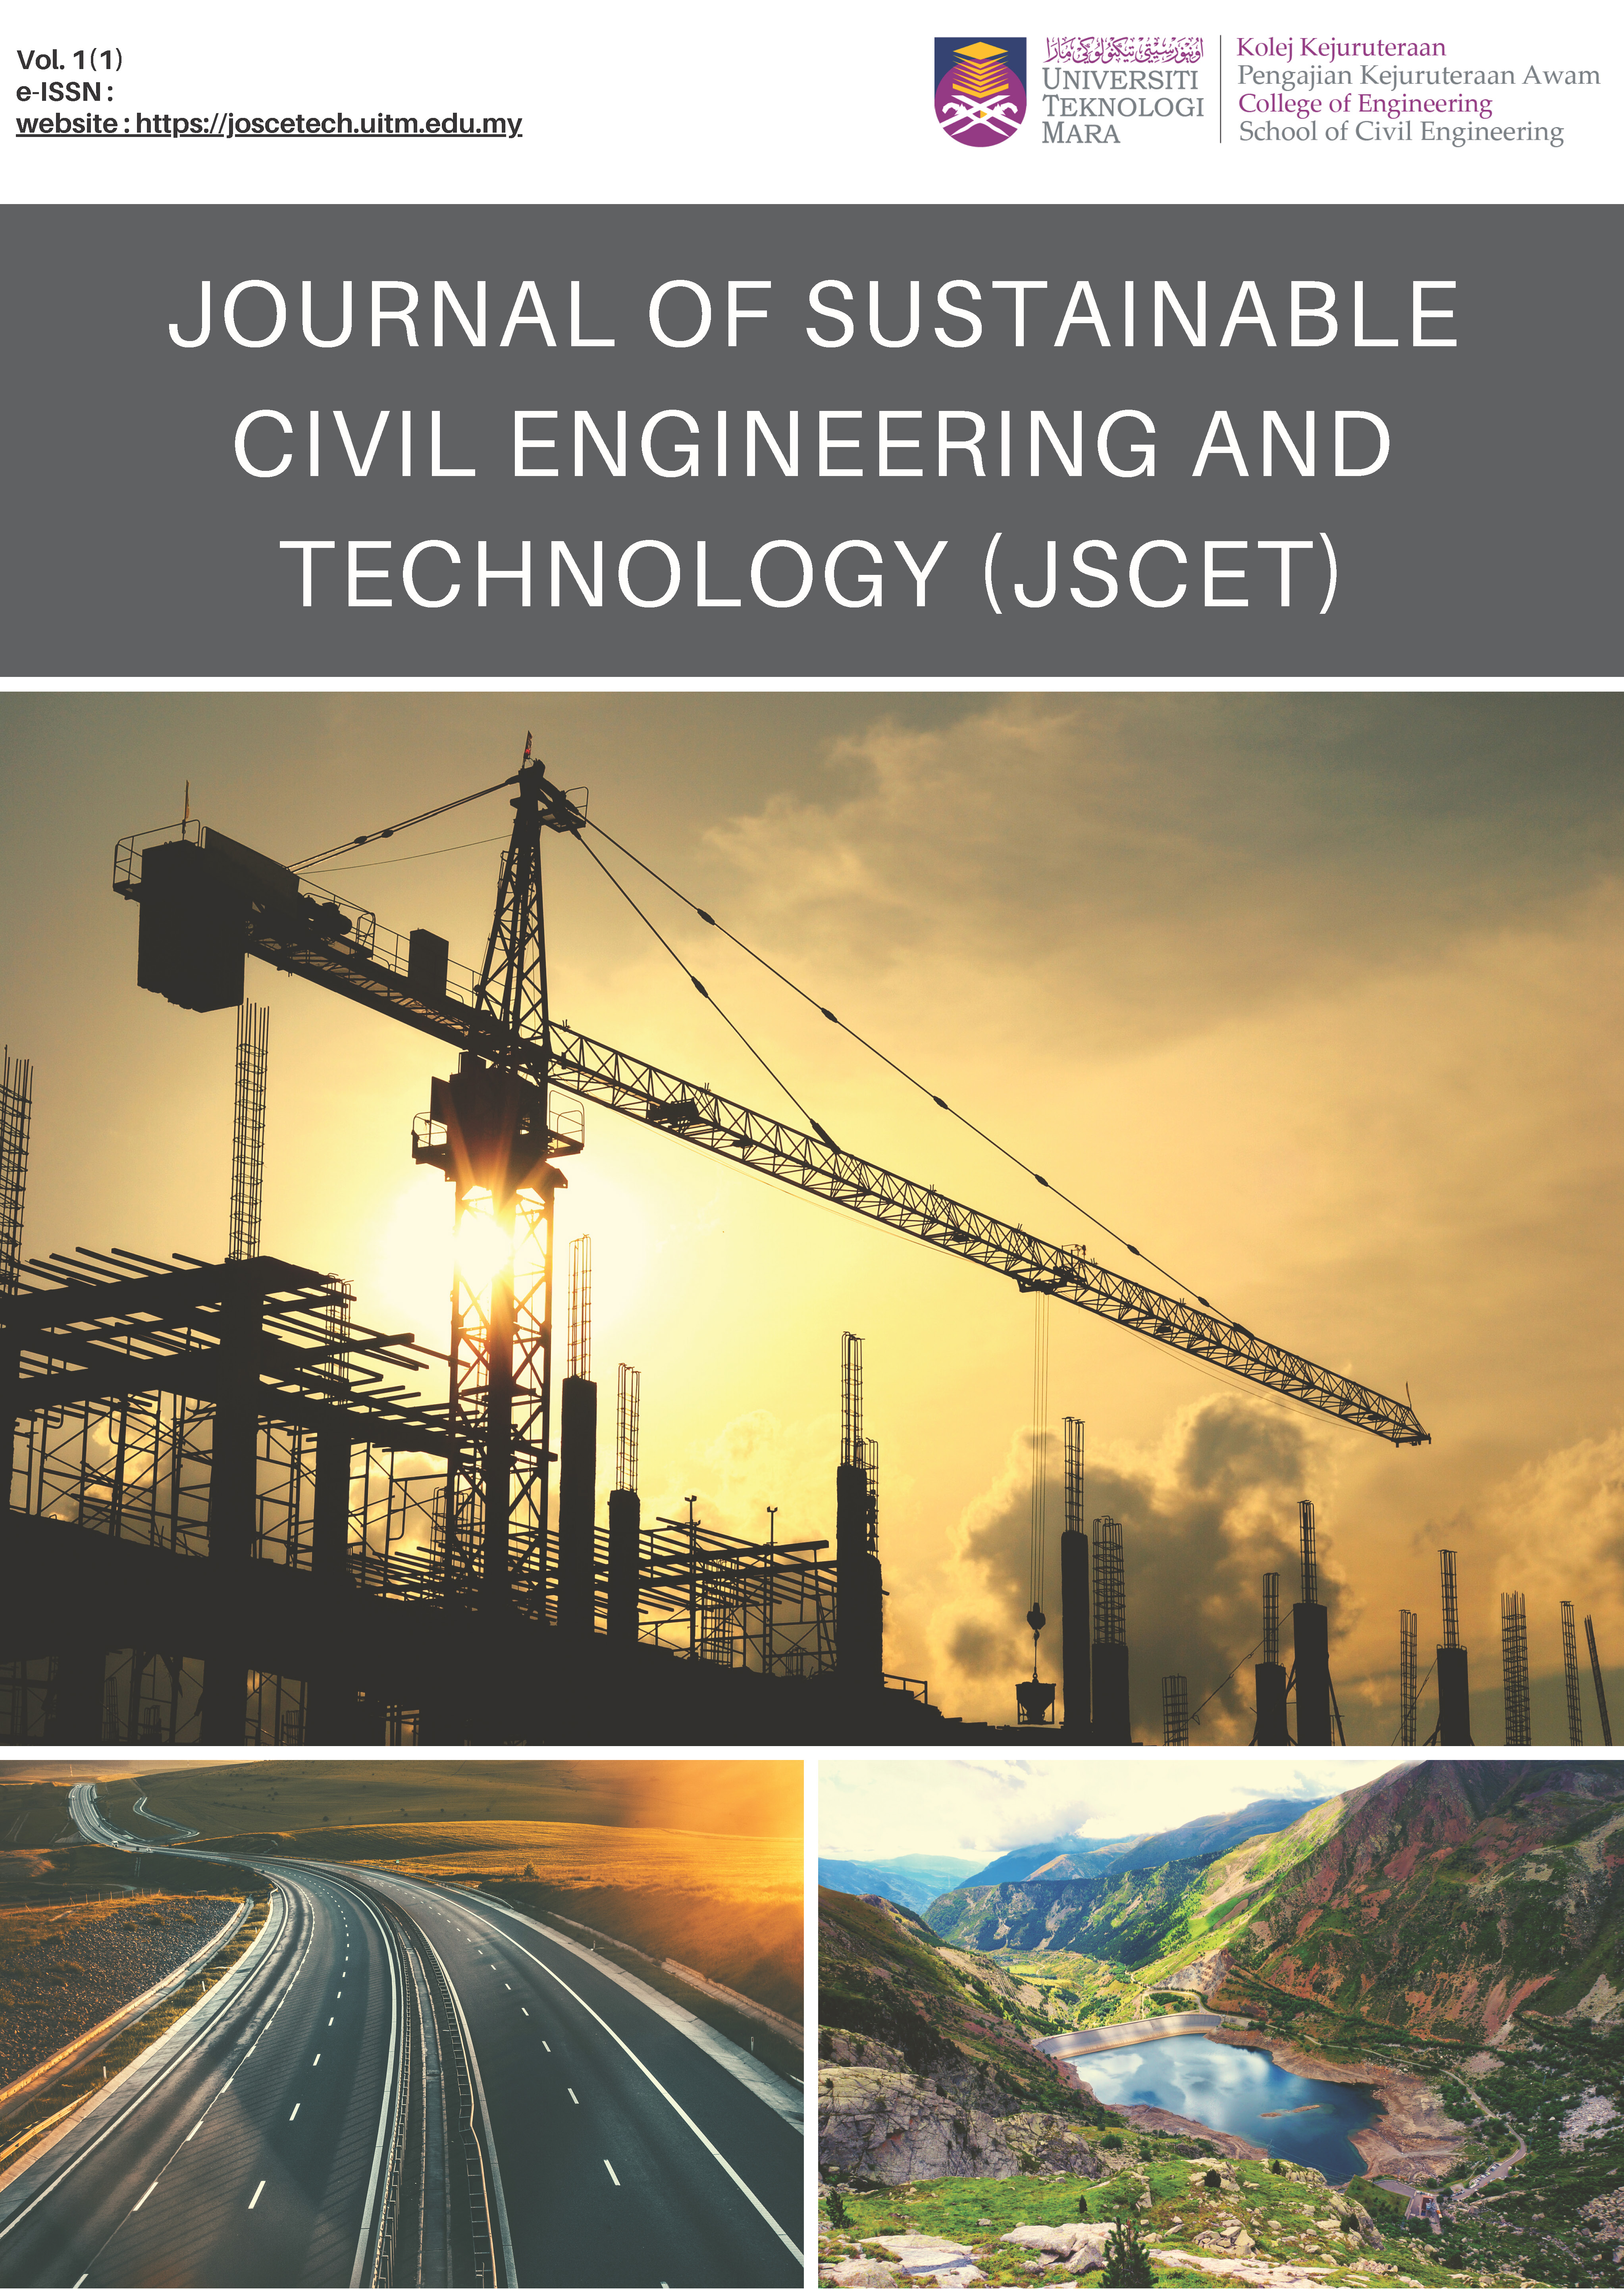  Journal of Sustainable Civil Engineering and Technology